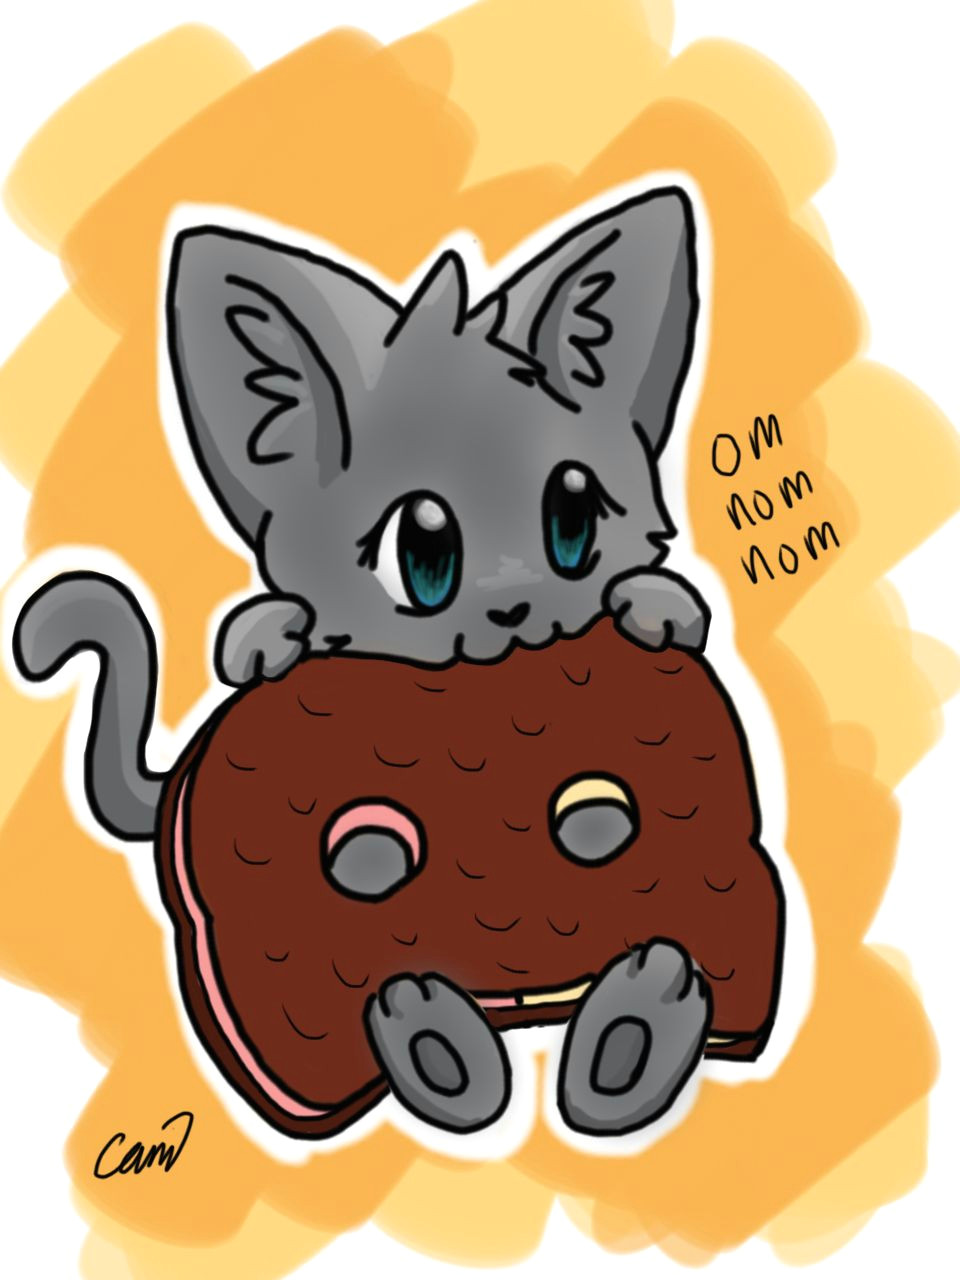 old cat eating a cookie cat by teal newt for impossible dreamer